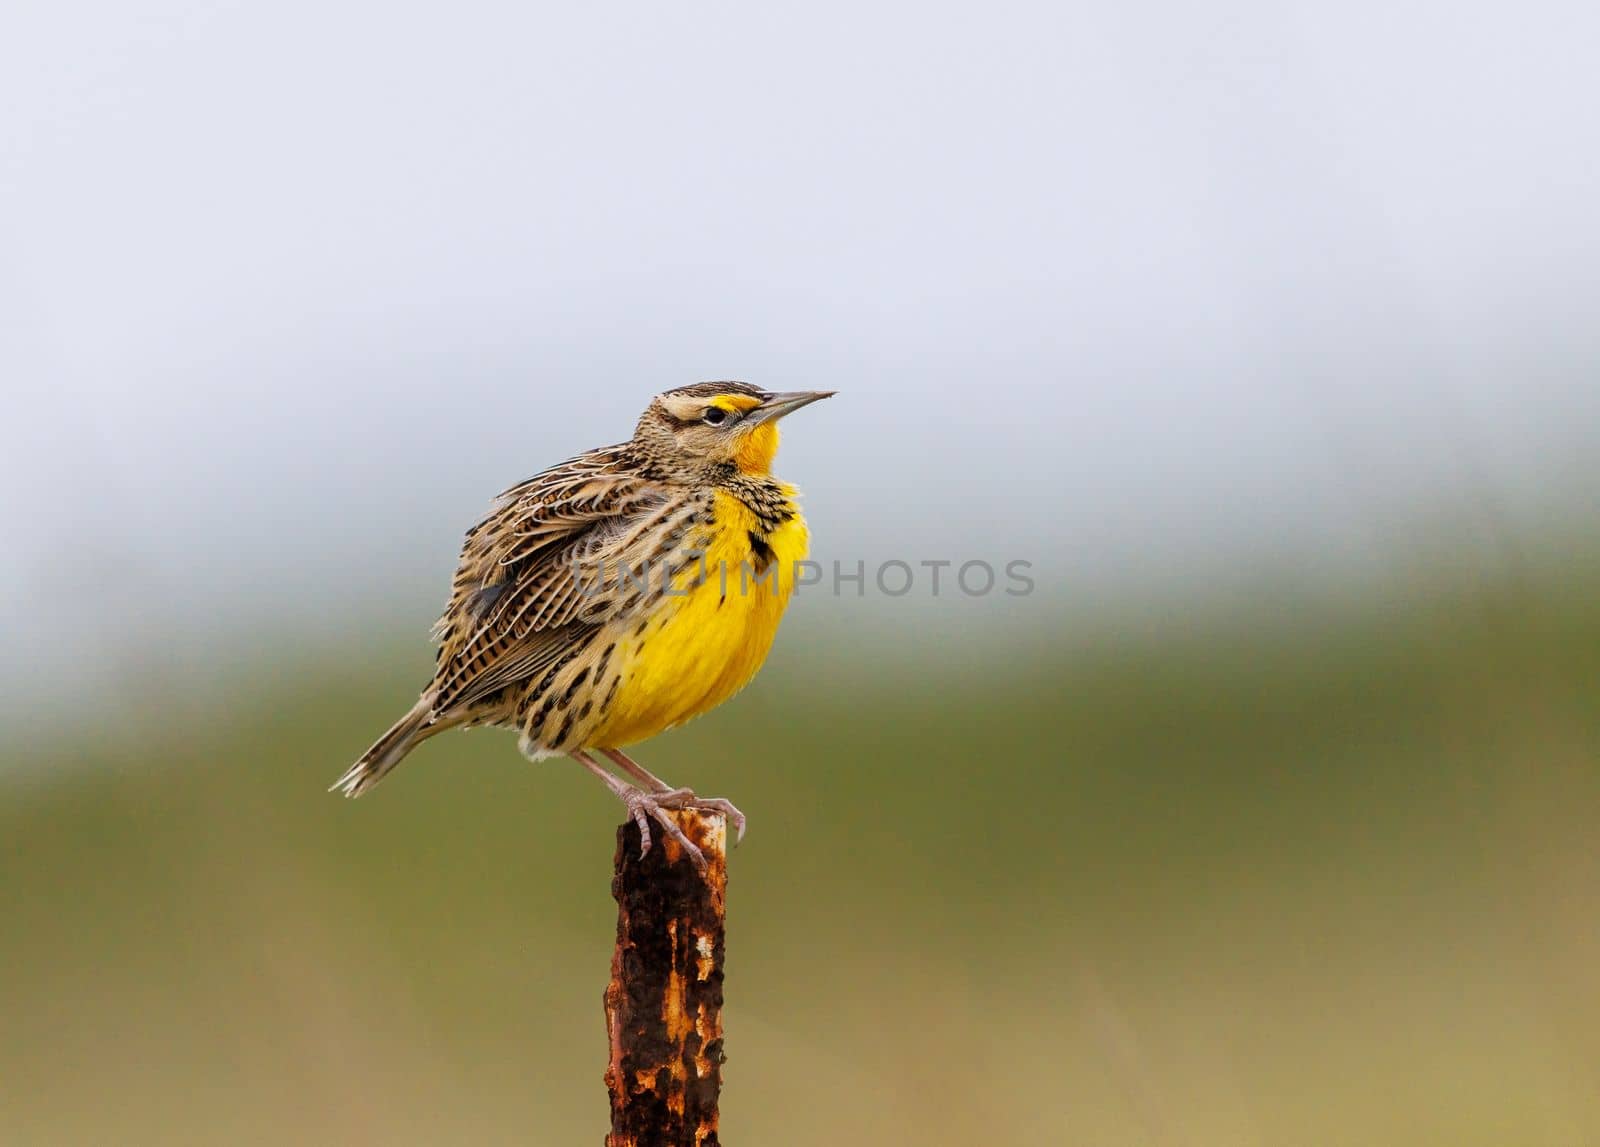 Western Meadowlark perched on a stump in Texas during a nice summer morning